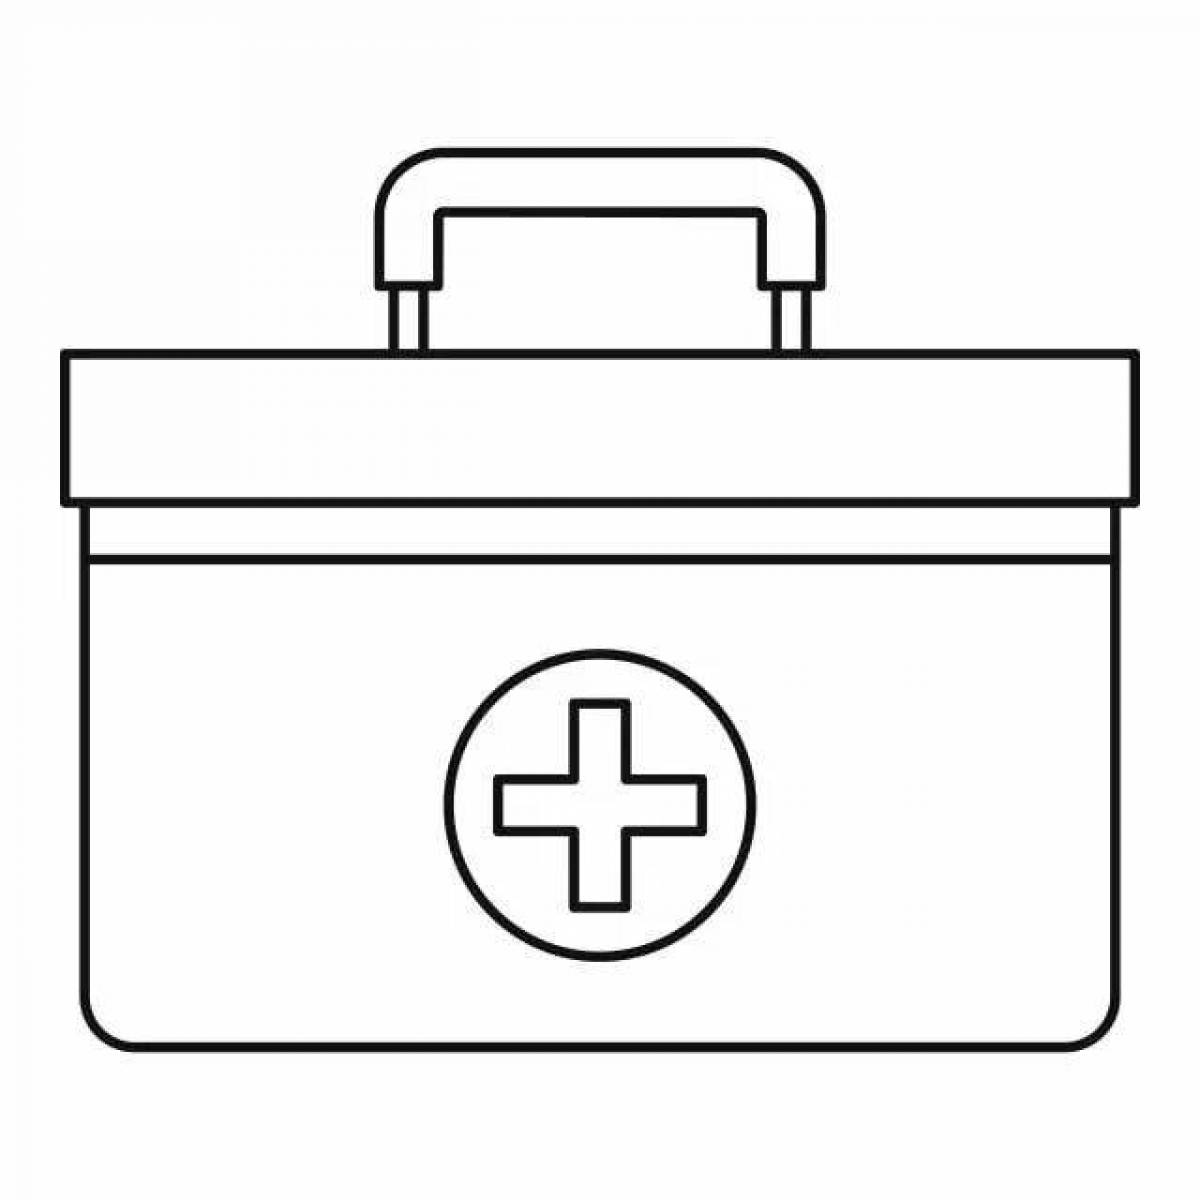 Colourful dazzling first aid kit coloring book